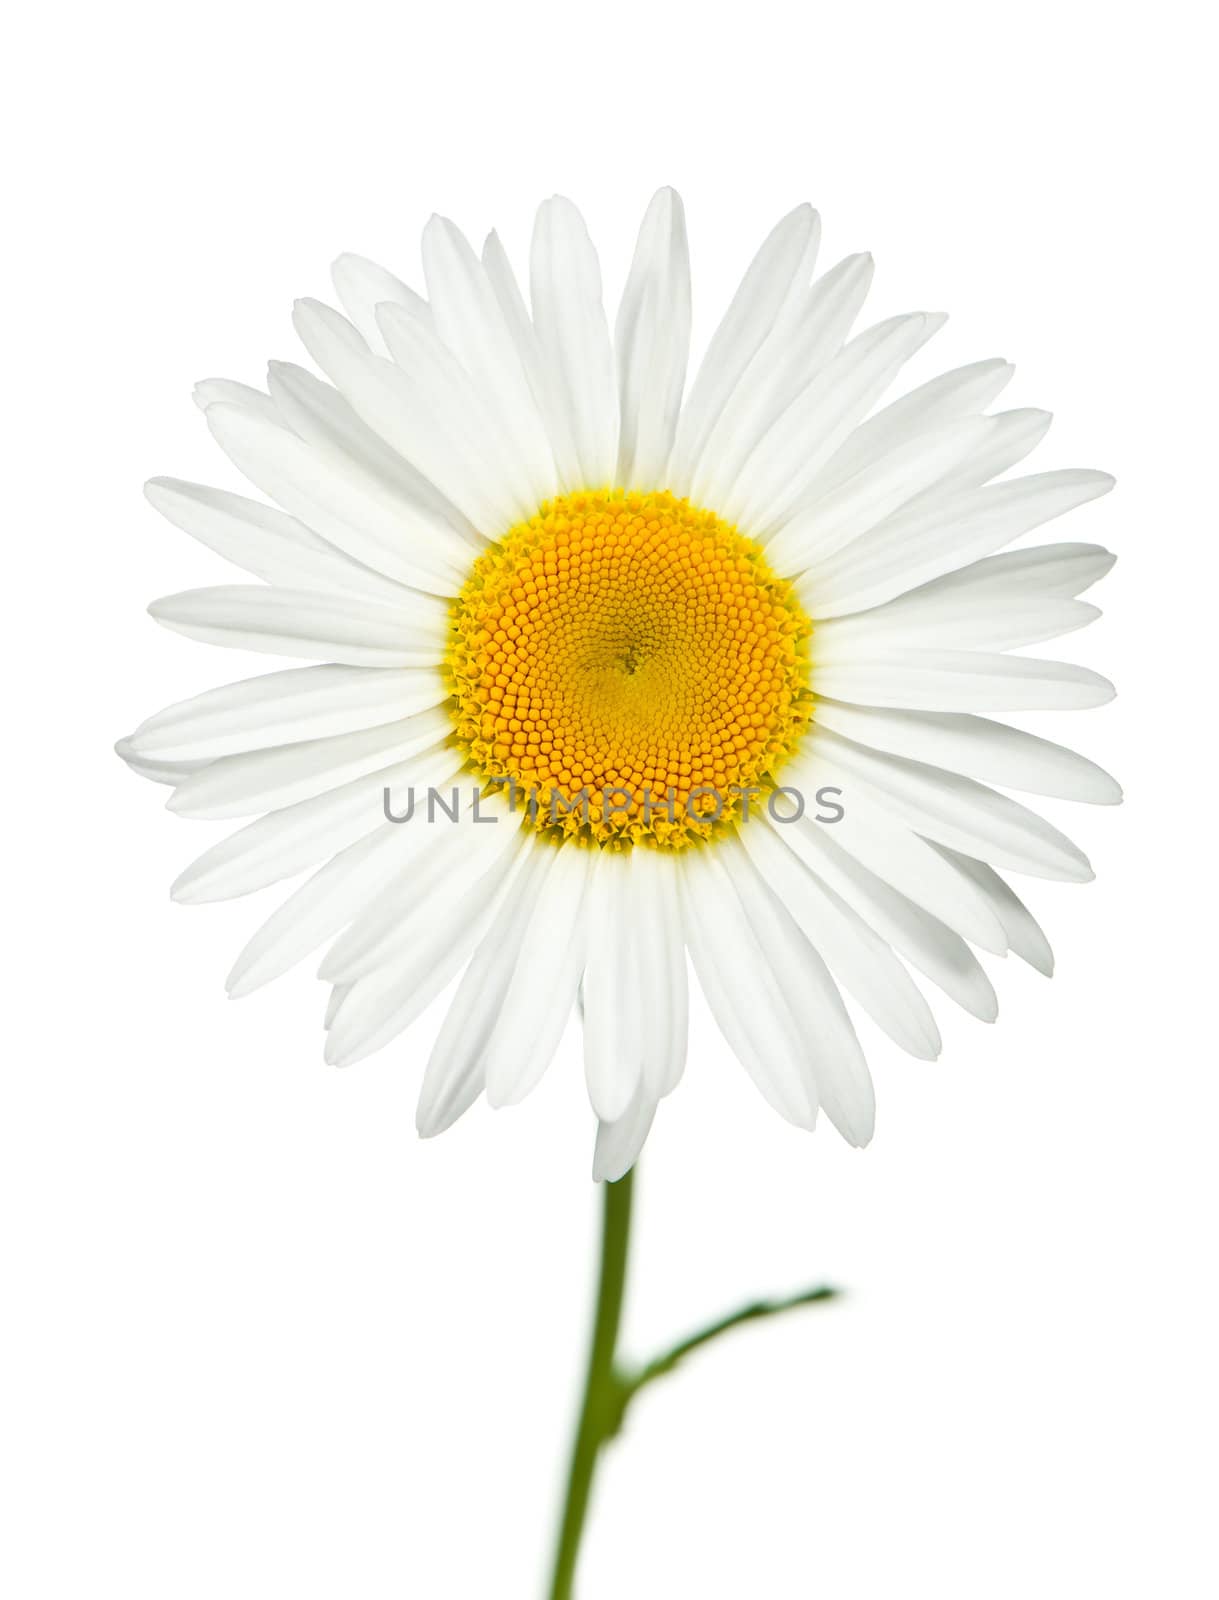 Camomile. It is isolated on a white background